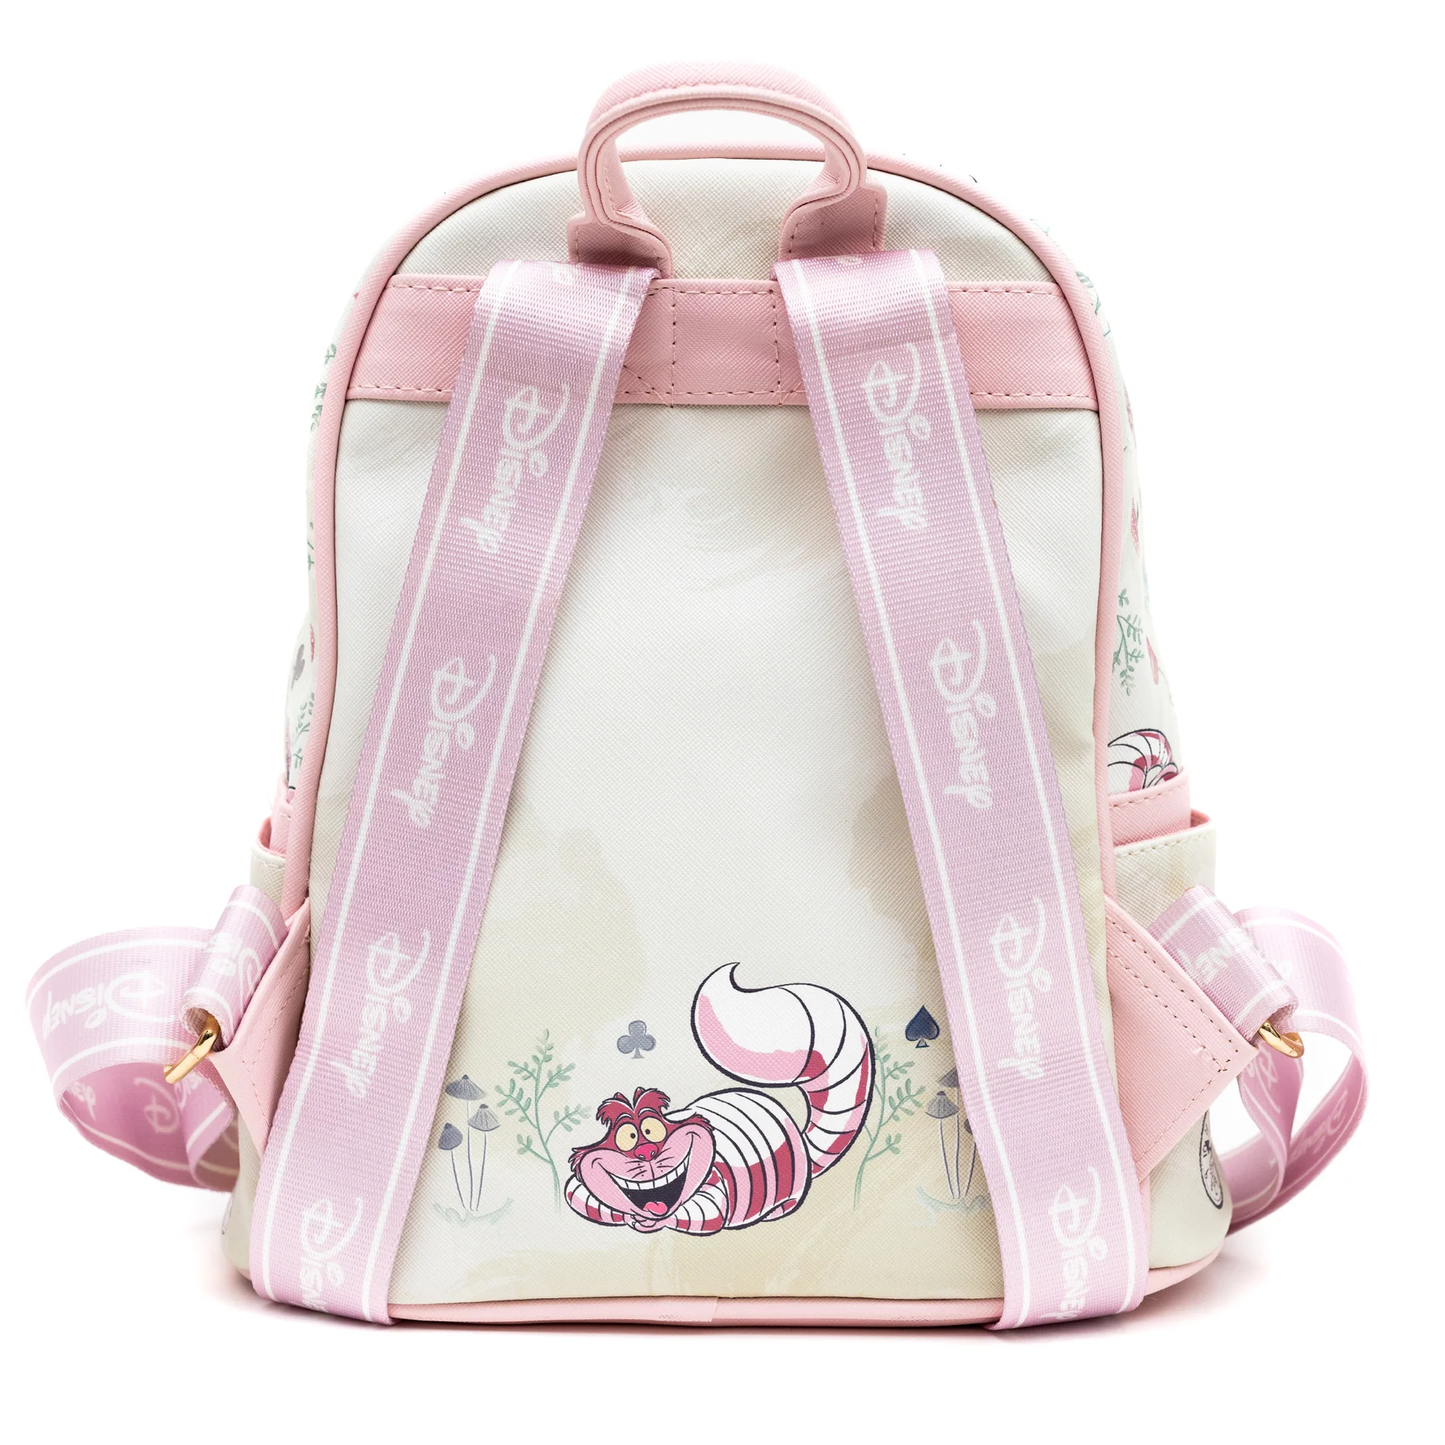 Exclusive - Snow White Forest Scene Mini Backpack | Officially Licensed | Vegan Leather | 8.5” x 10” x 4”